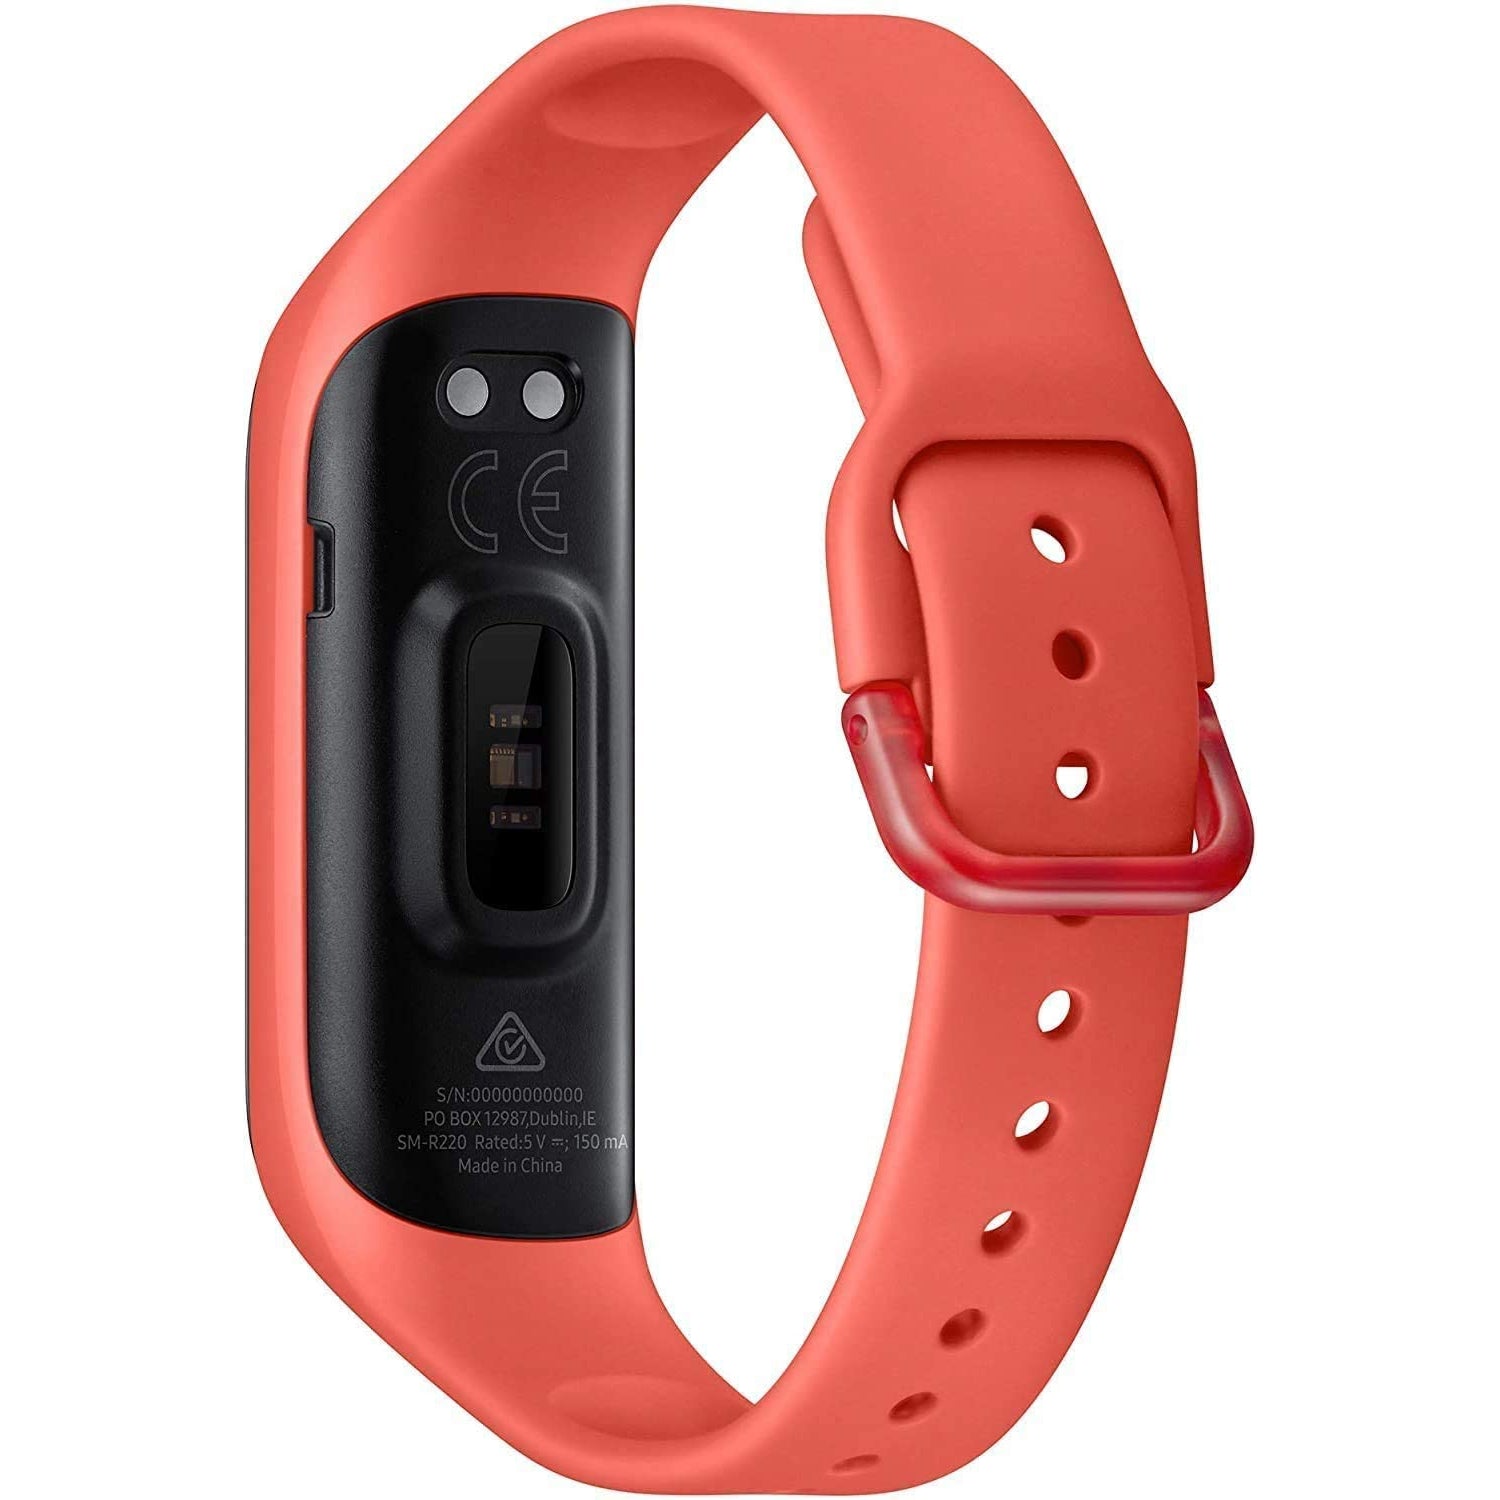 Samsung Galaxy Fit 2 - SM-R220 - Black / Red - NO STRAPS & CHARGER